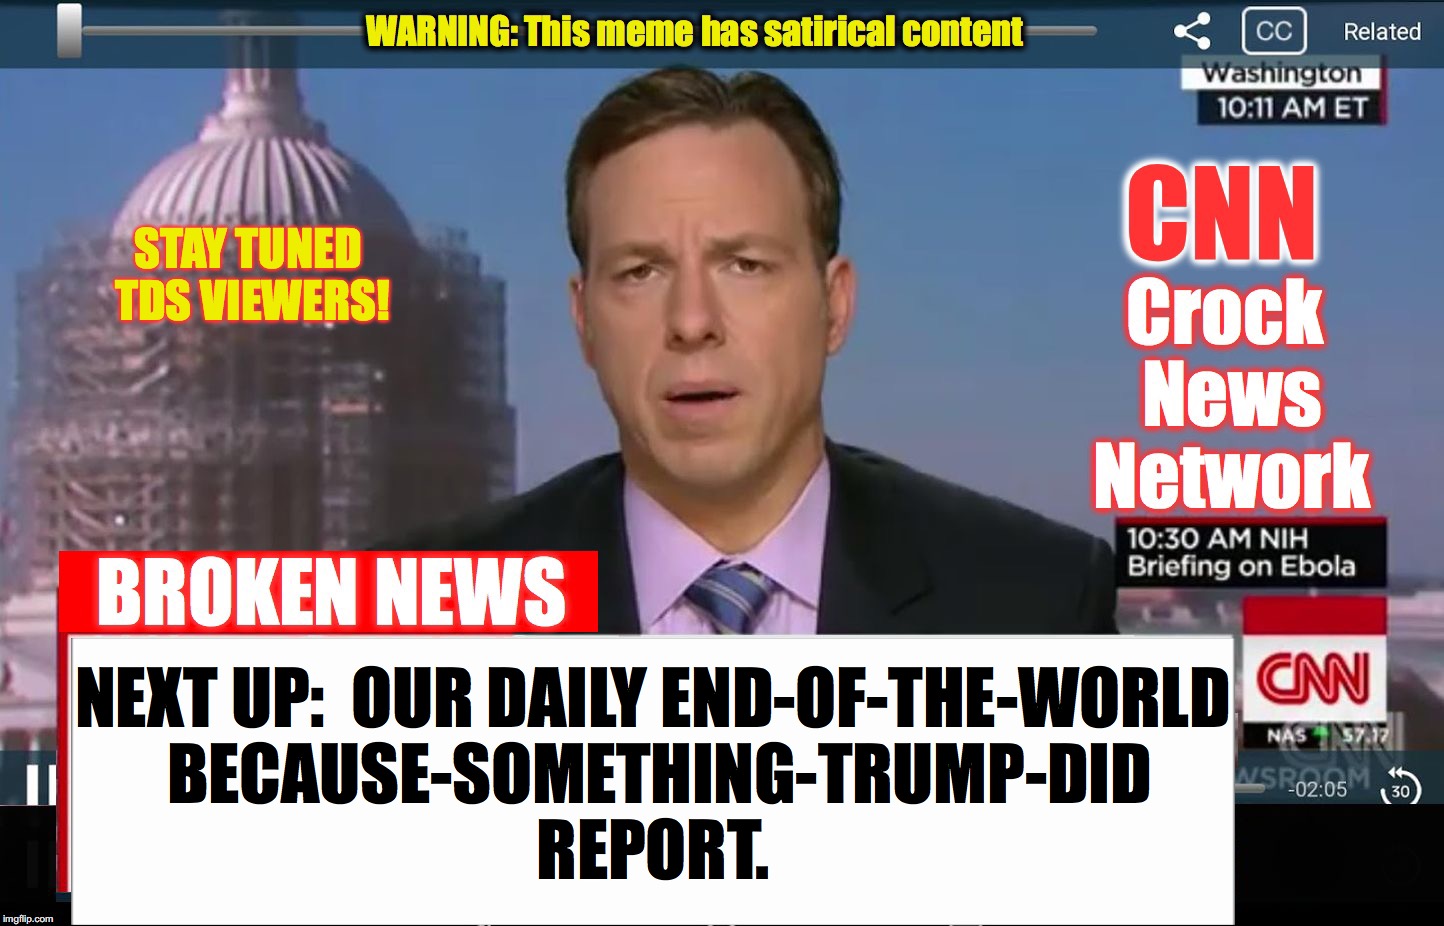 CNN Crock News Network | STAY TUNED TDS VIEWERS! NEXT UP:  OUR DAILY END-OF-THE-WORLD BECAUSE-SOMETHING-TRUMP-DID  REPORT. | image tagged in cnn crock news network | made w/ Imgflip meme maker